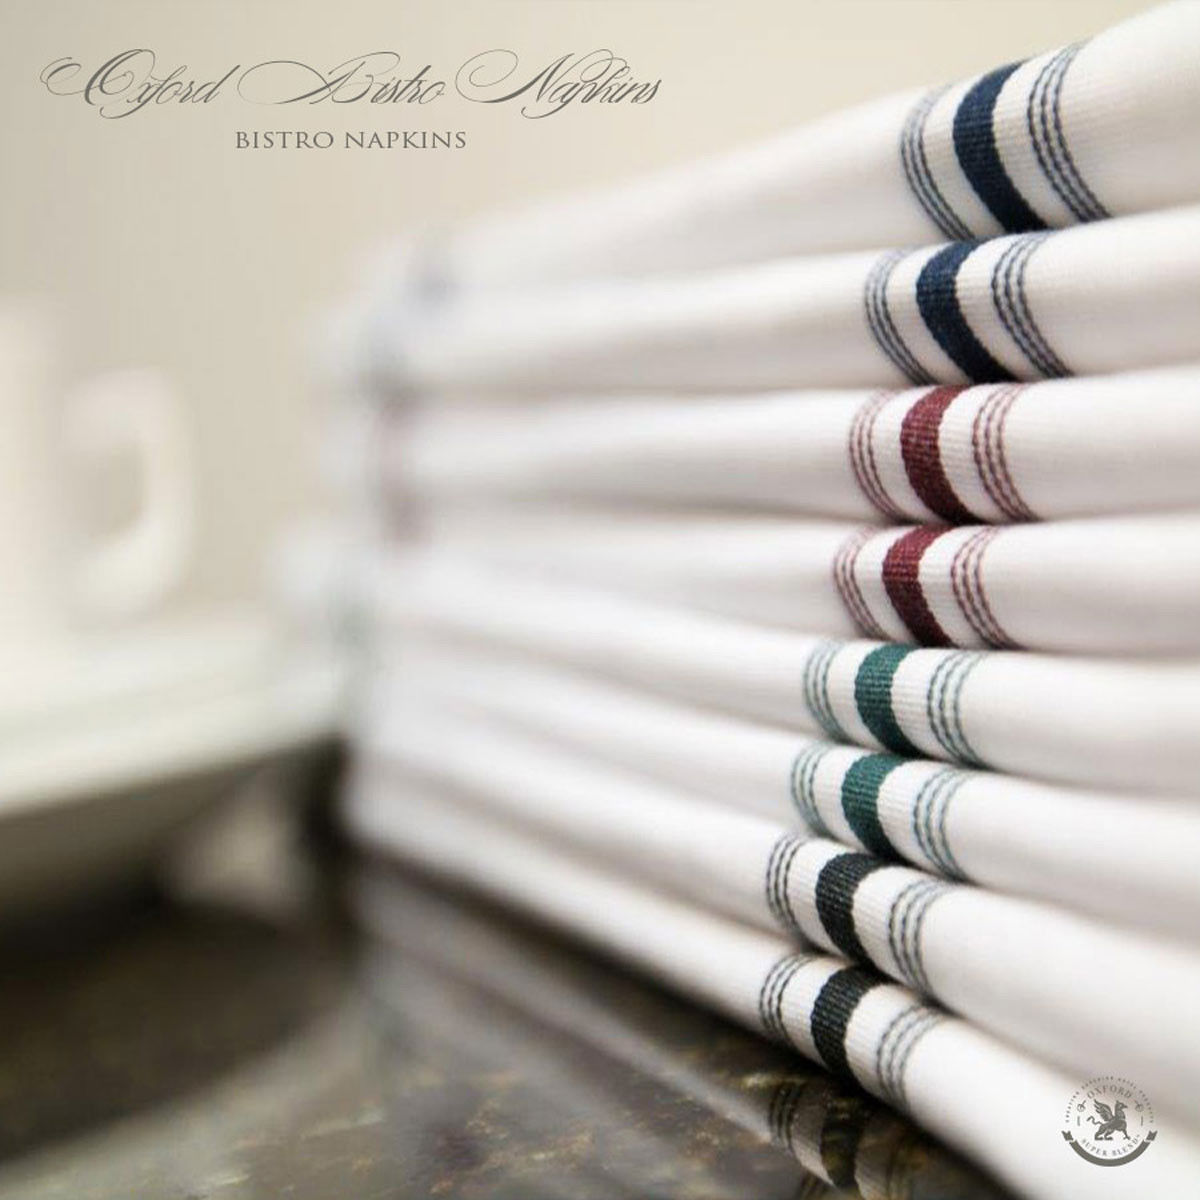 Is it possible to purchase these linen napkins bulk wholesale?